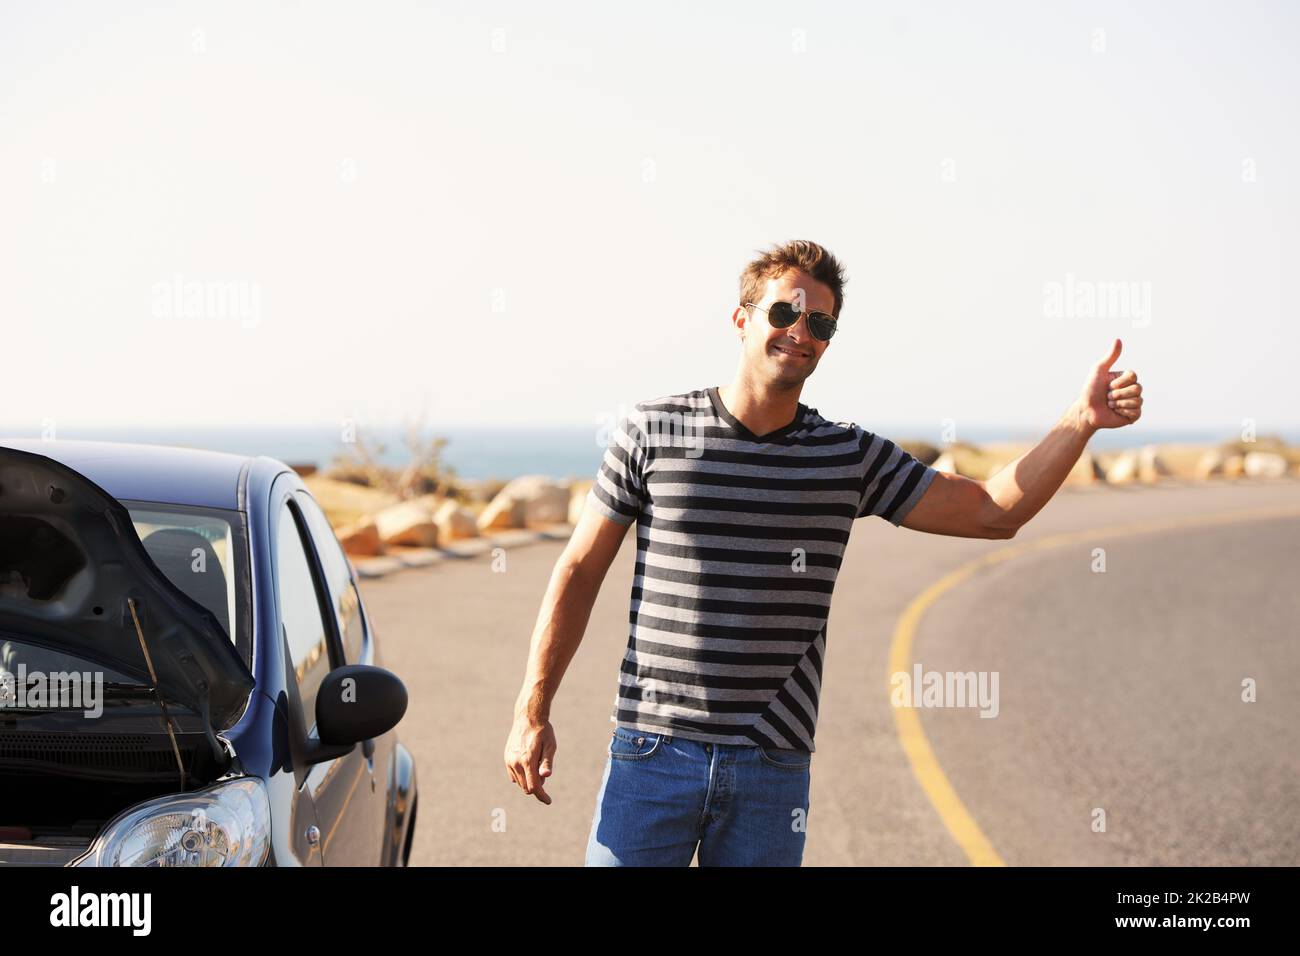 Hes hitching a ride. A handsome young man standing on the side of the road besides his broken-down car and hitching a ride. Stock Photo